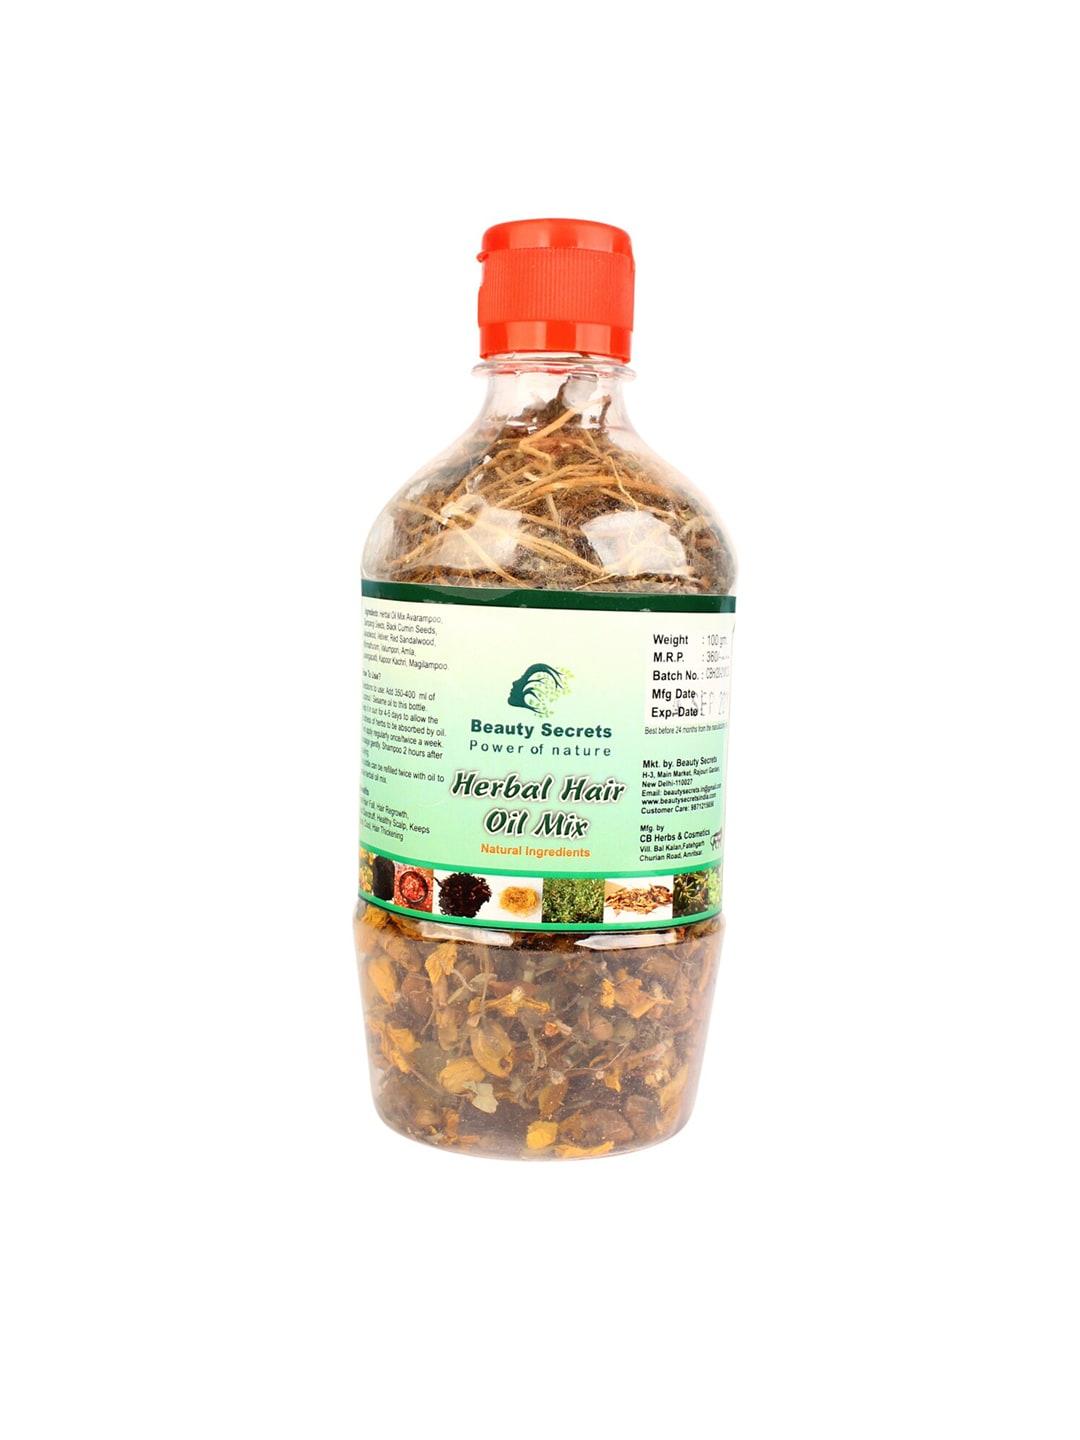 Beauty Secrets Dry Ayurvedic Herbal Hair Oil Mix with Natural Ingredients - 100 g